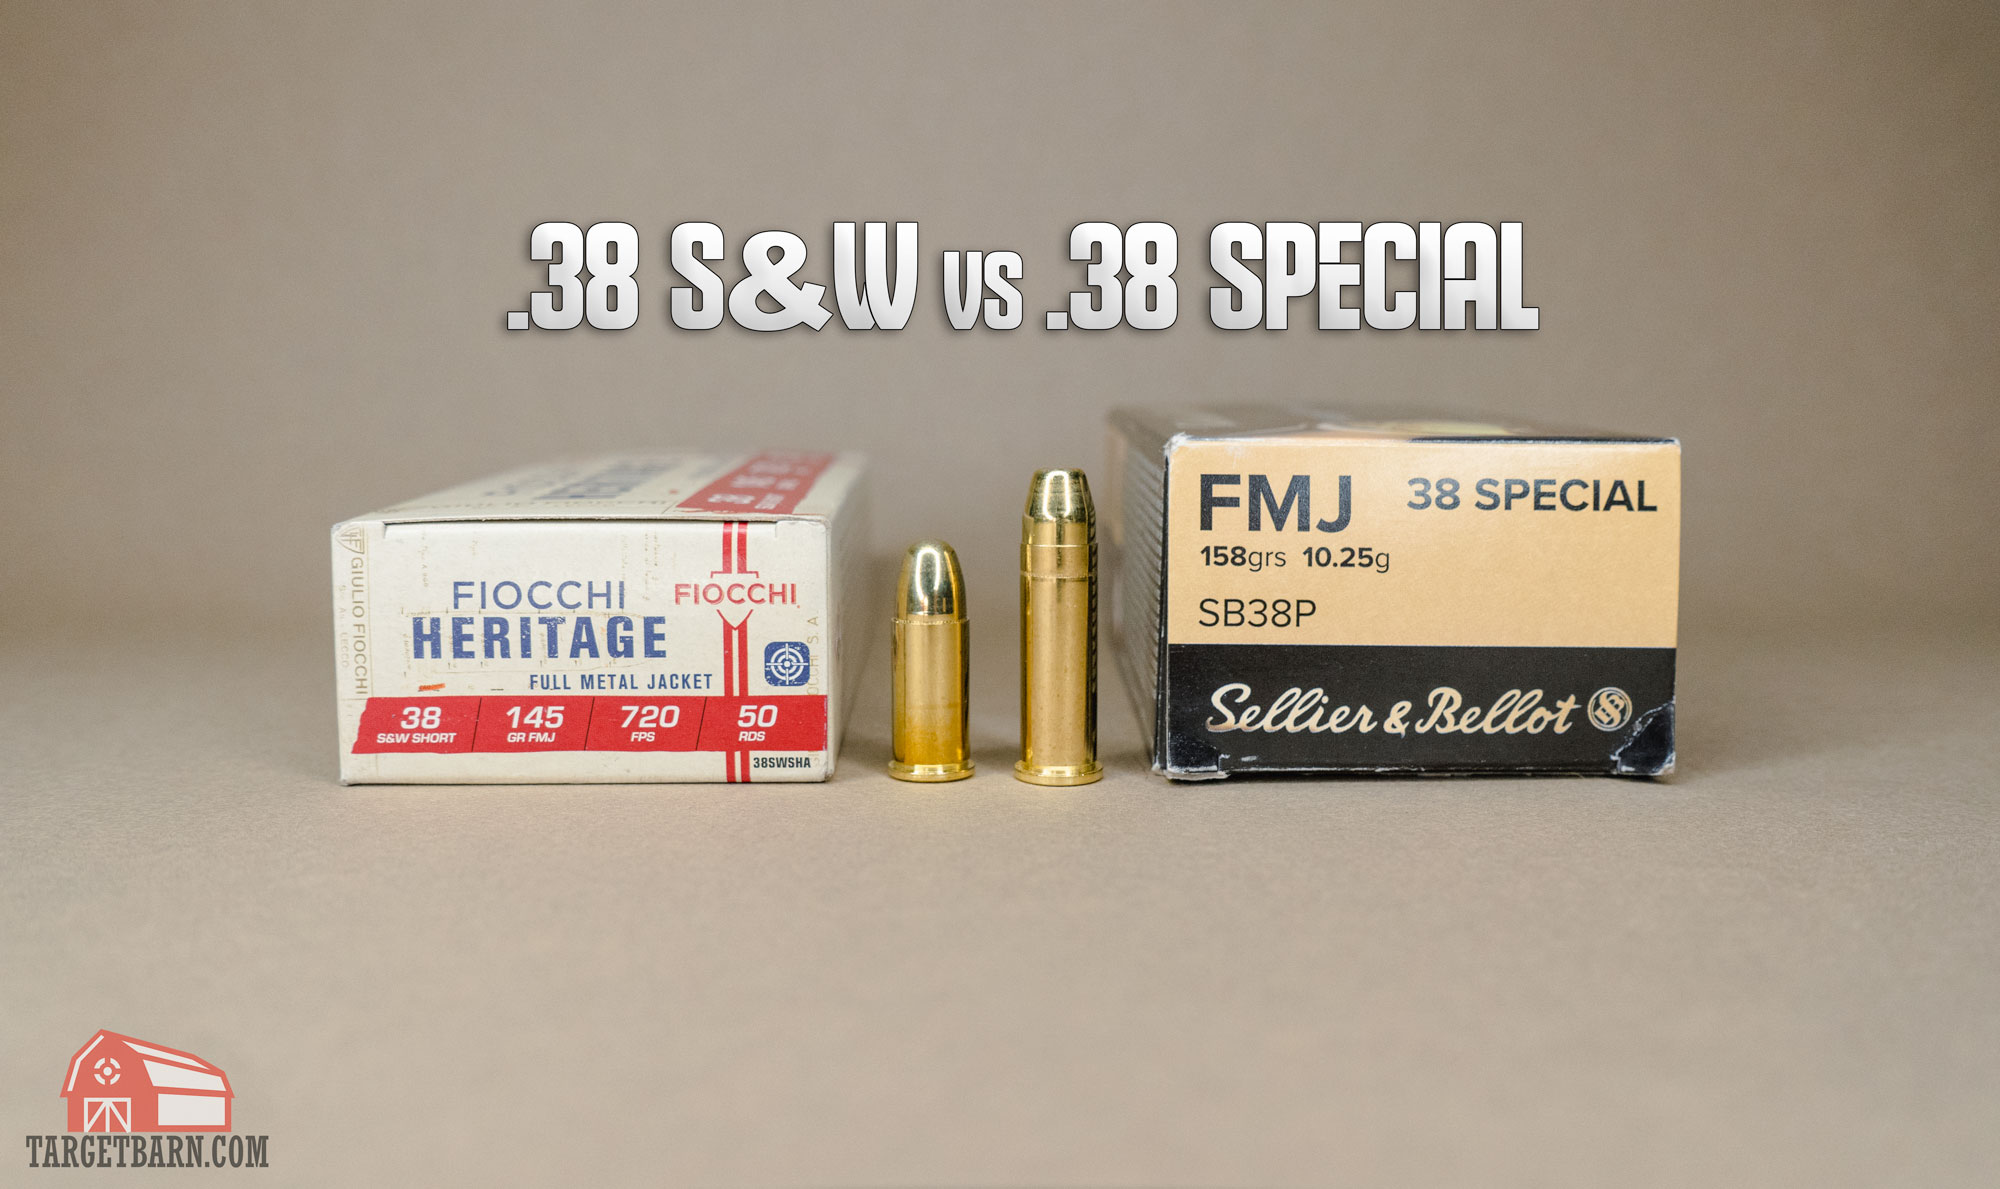 38 S&W Vs. 38 Special - What's The Difference?